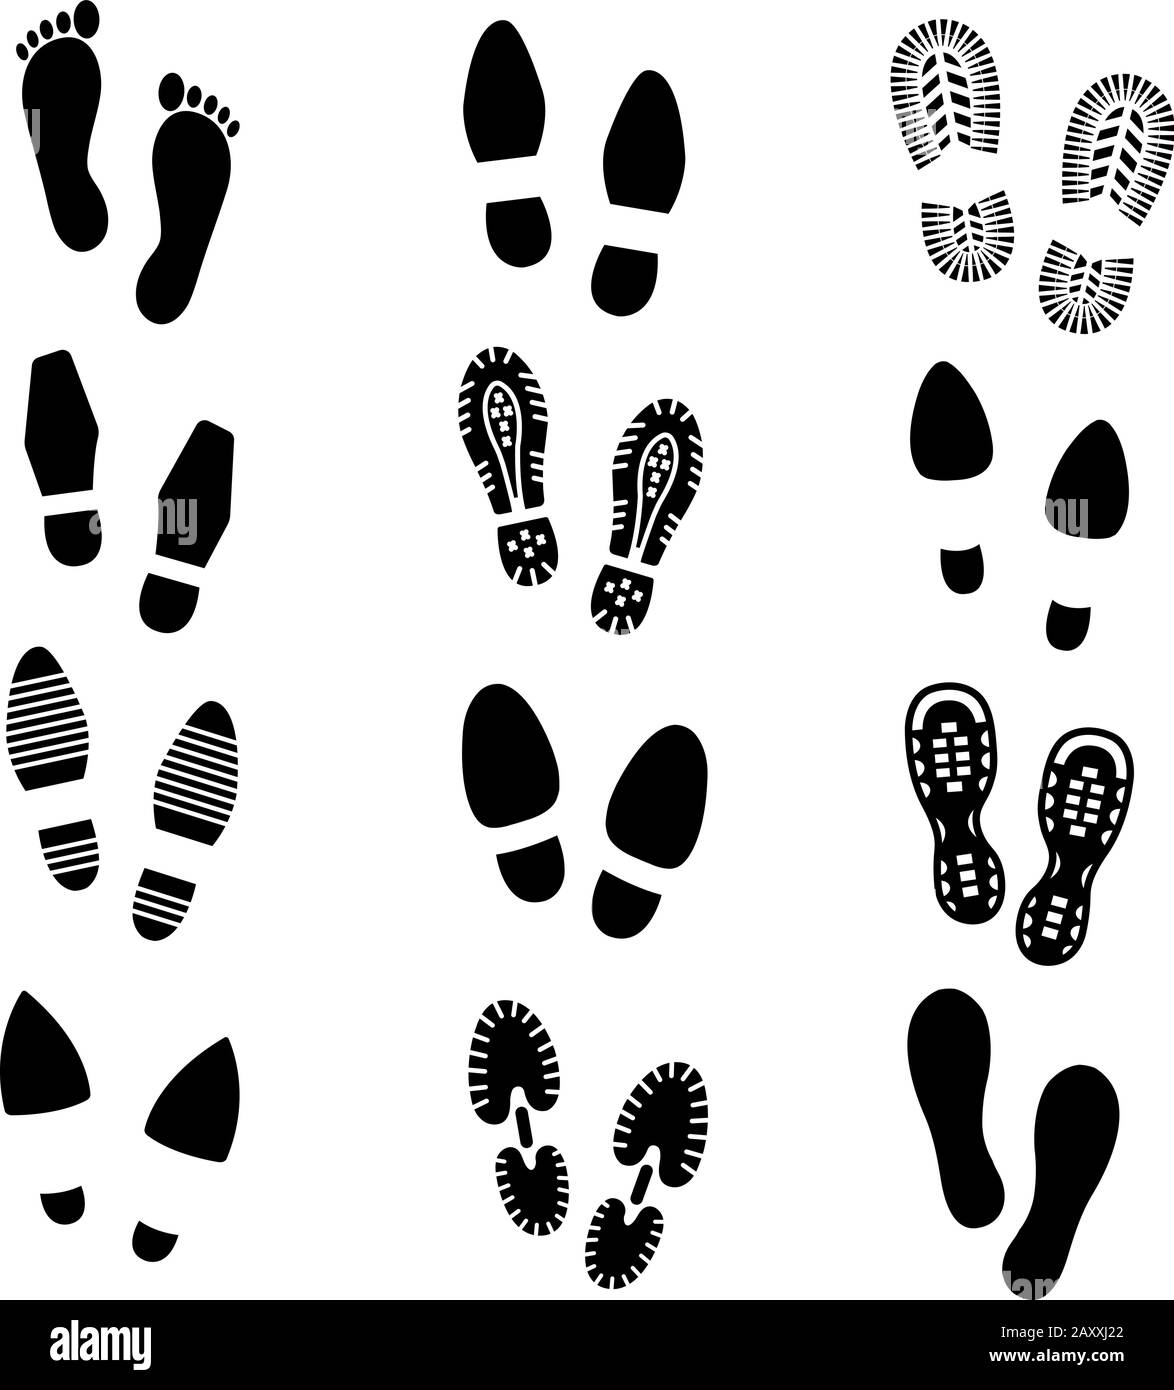 Footprints and shoes footmark vector silhouette icons set. Shoe print, sole shoe track, footprint shoe illustration Stock Vector